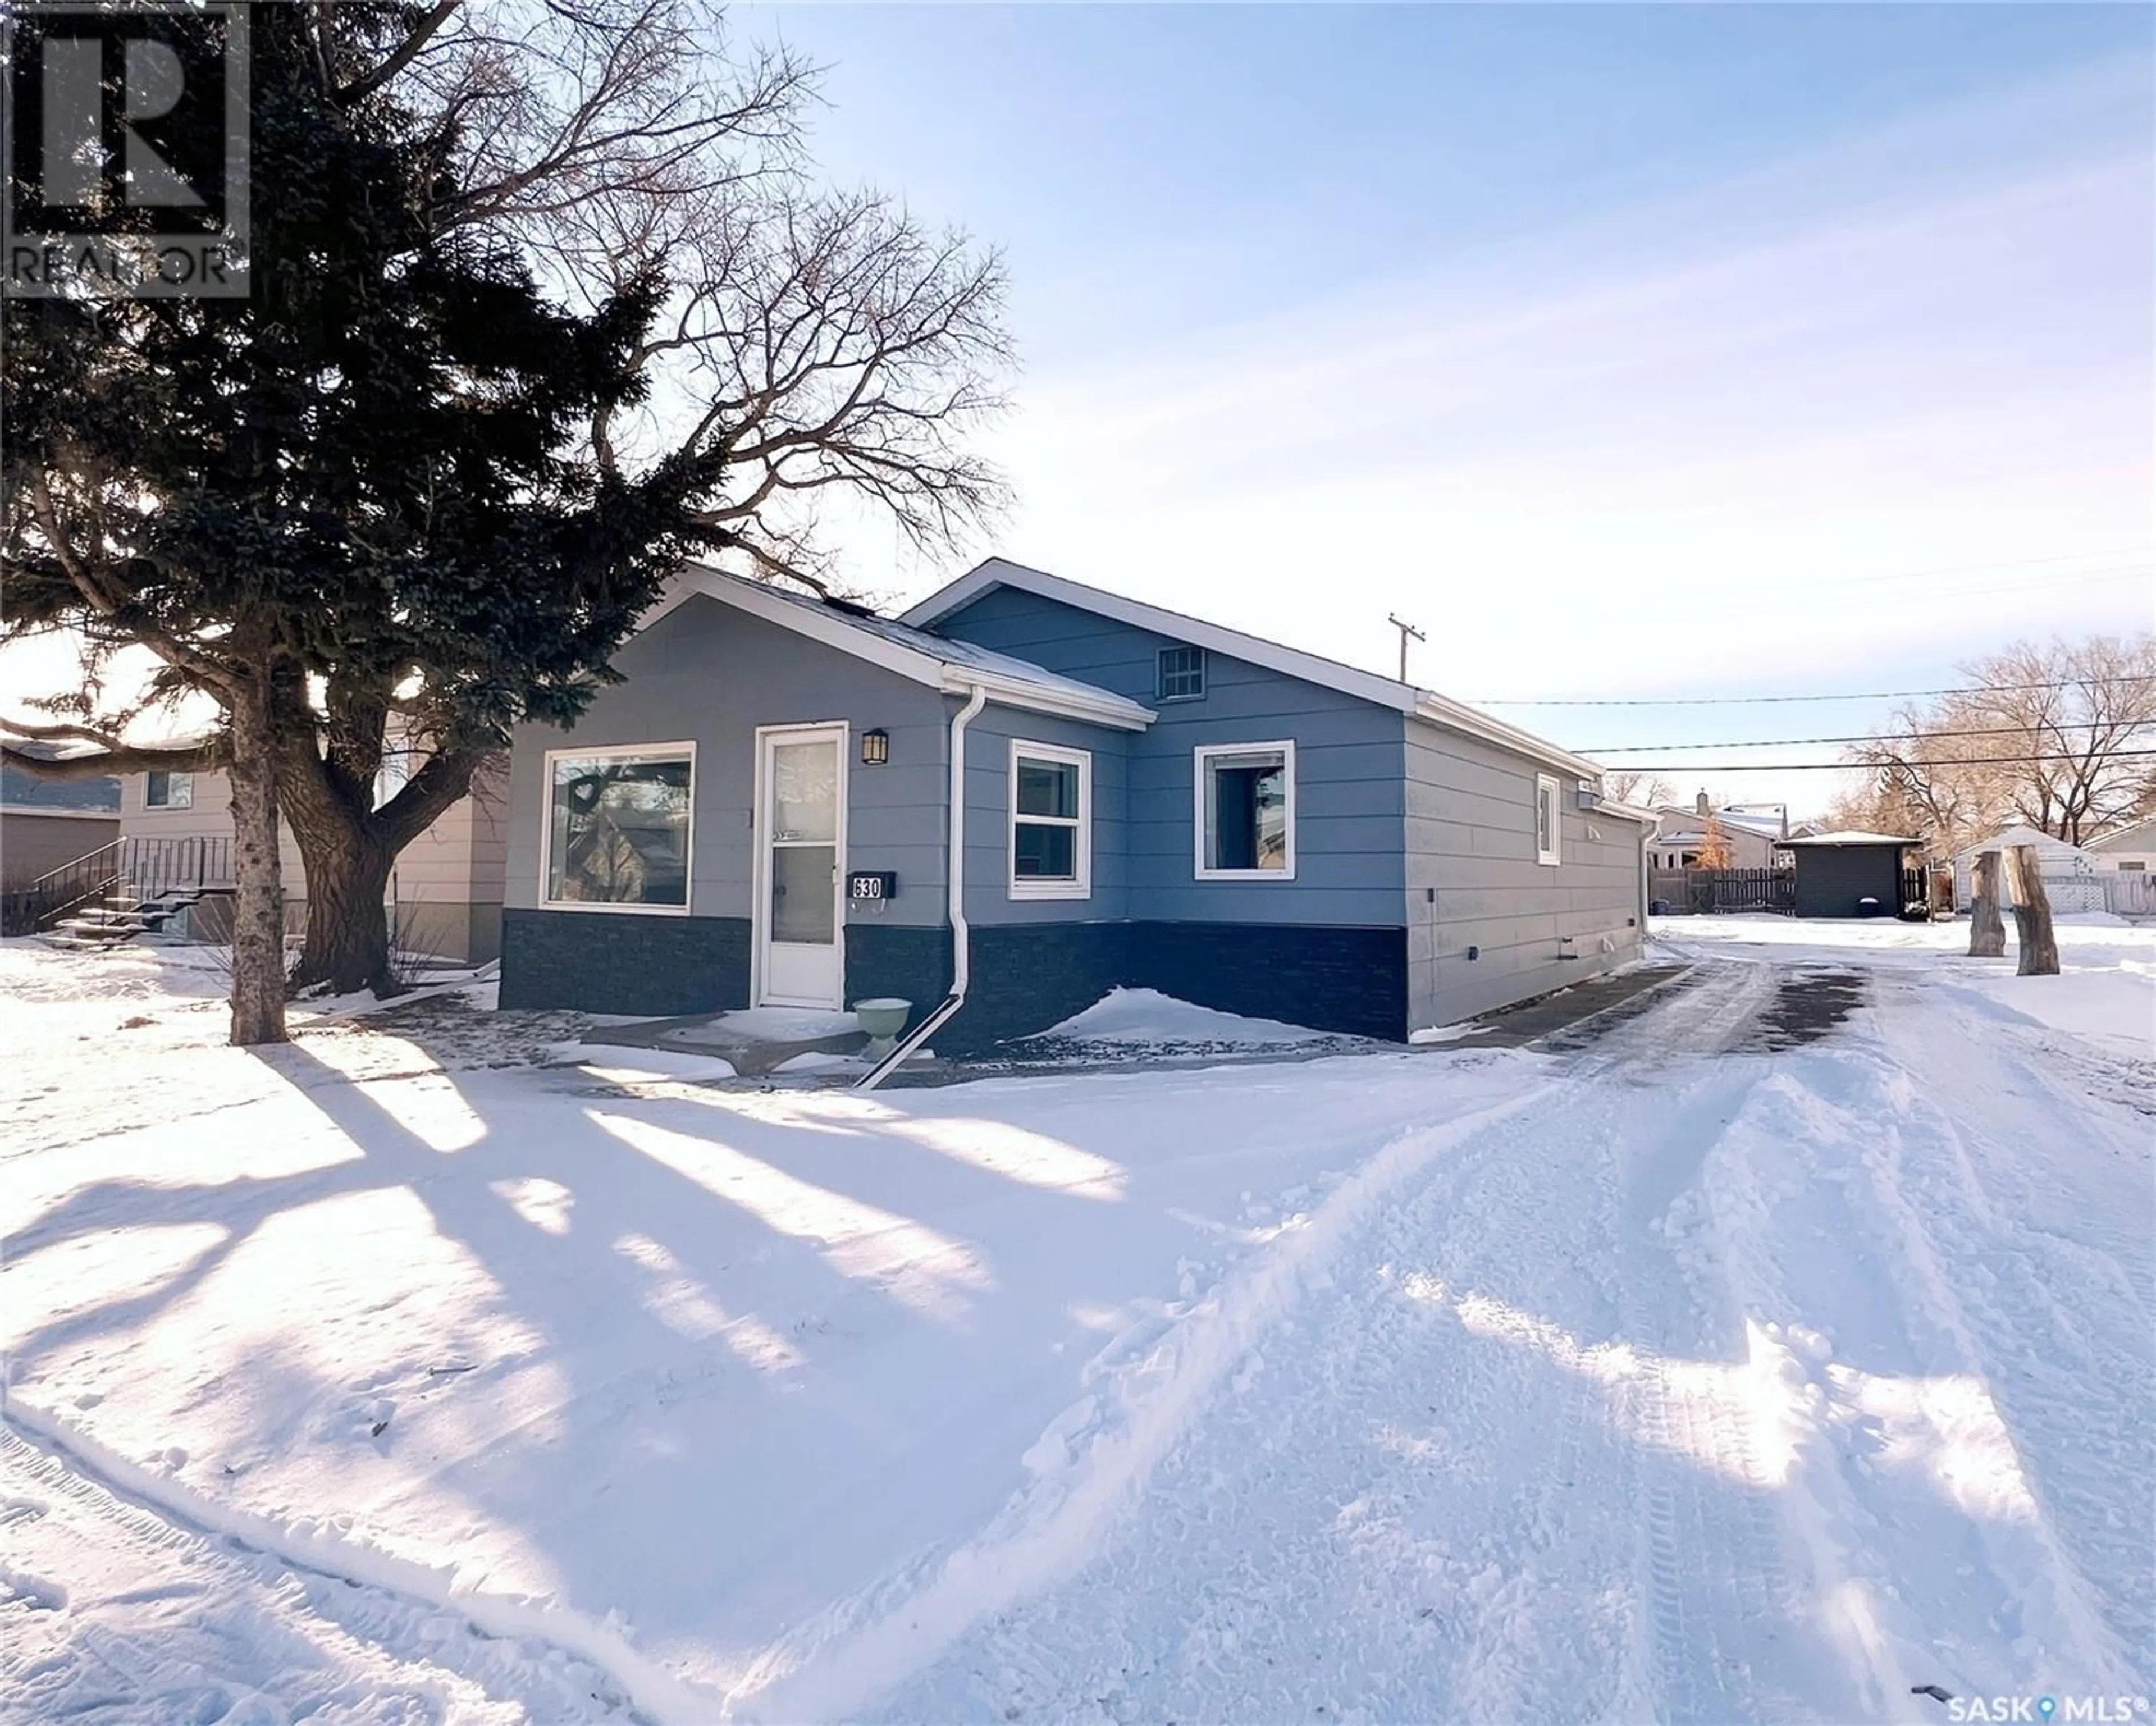 Home with unknown exterior material for 630 4th STREET, Estevan Saskatchewan S4A0V5